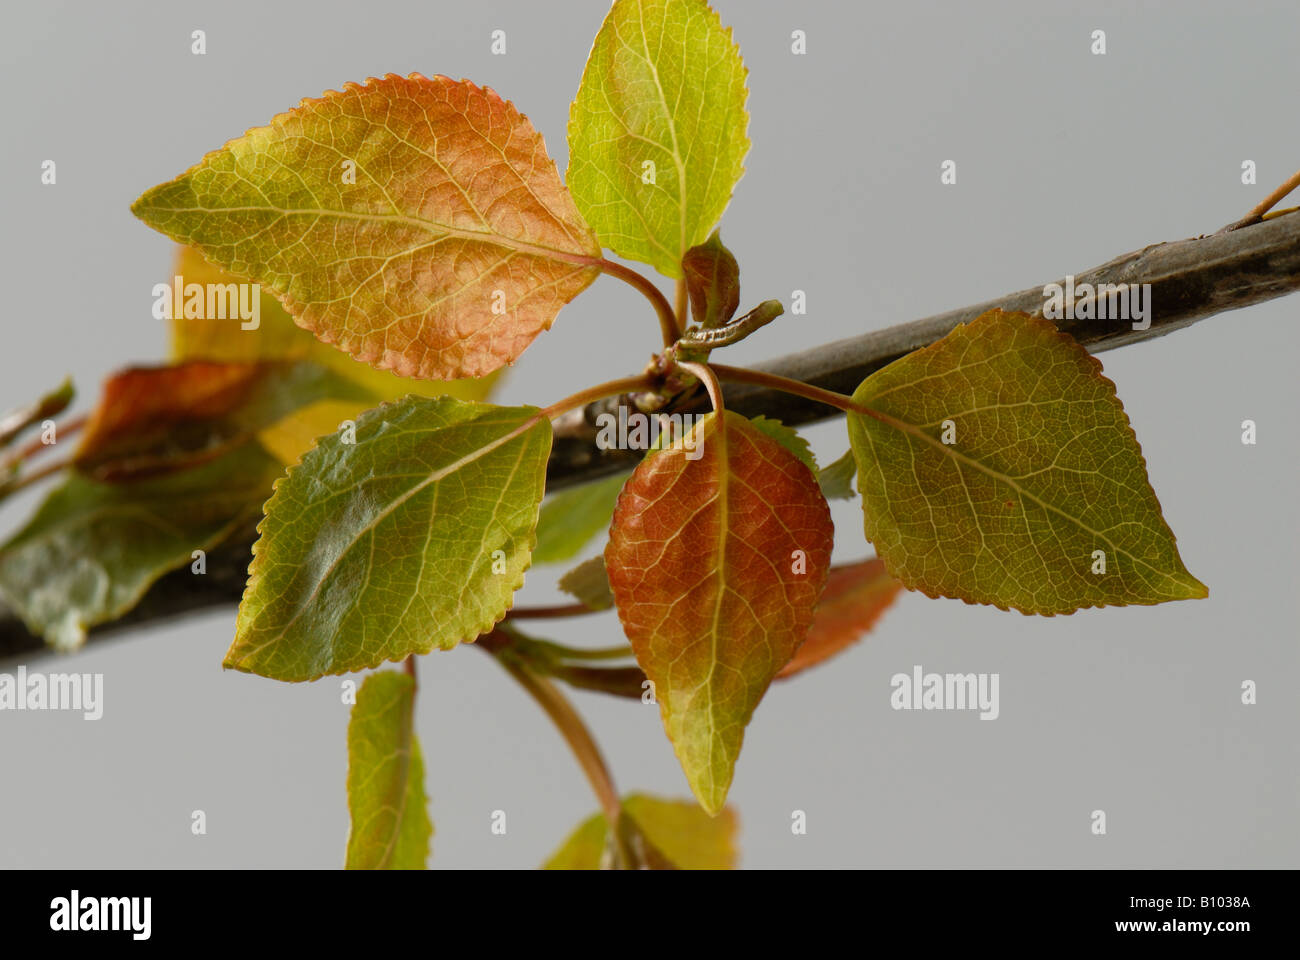 Young immature spring leaves on Populus robusta tree Stock Photo